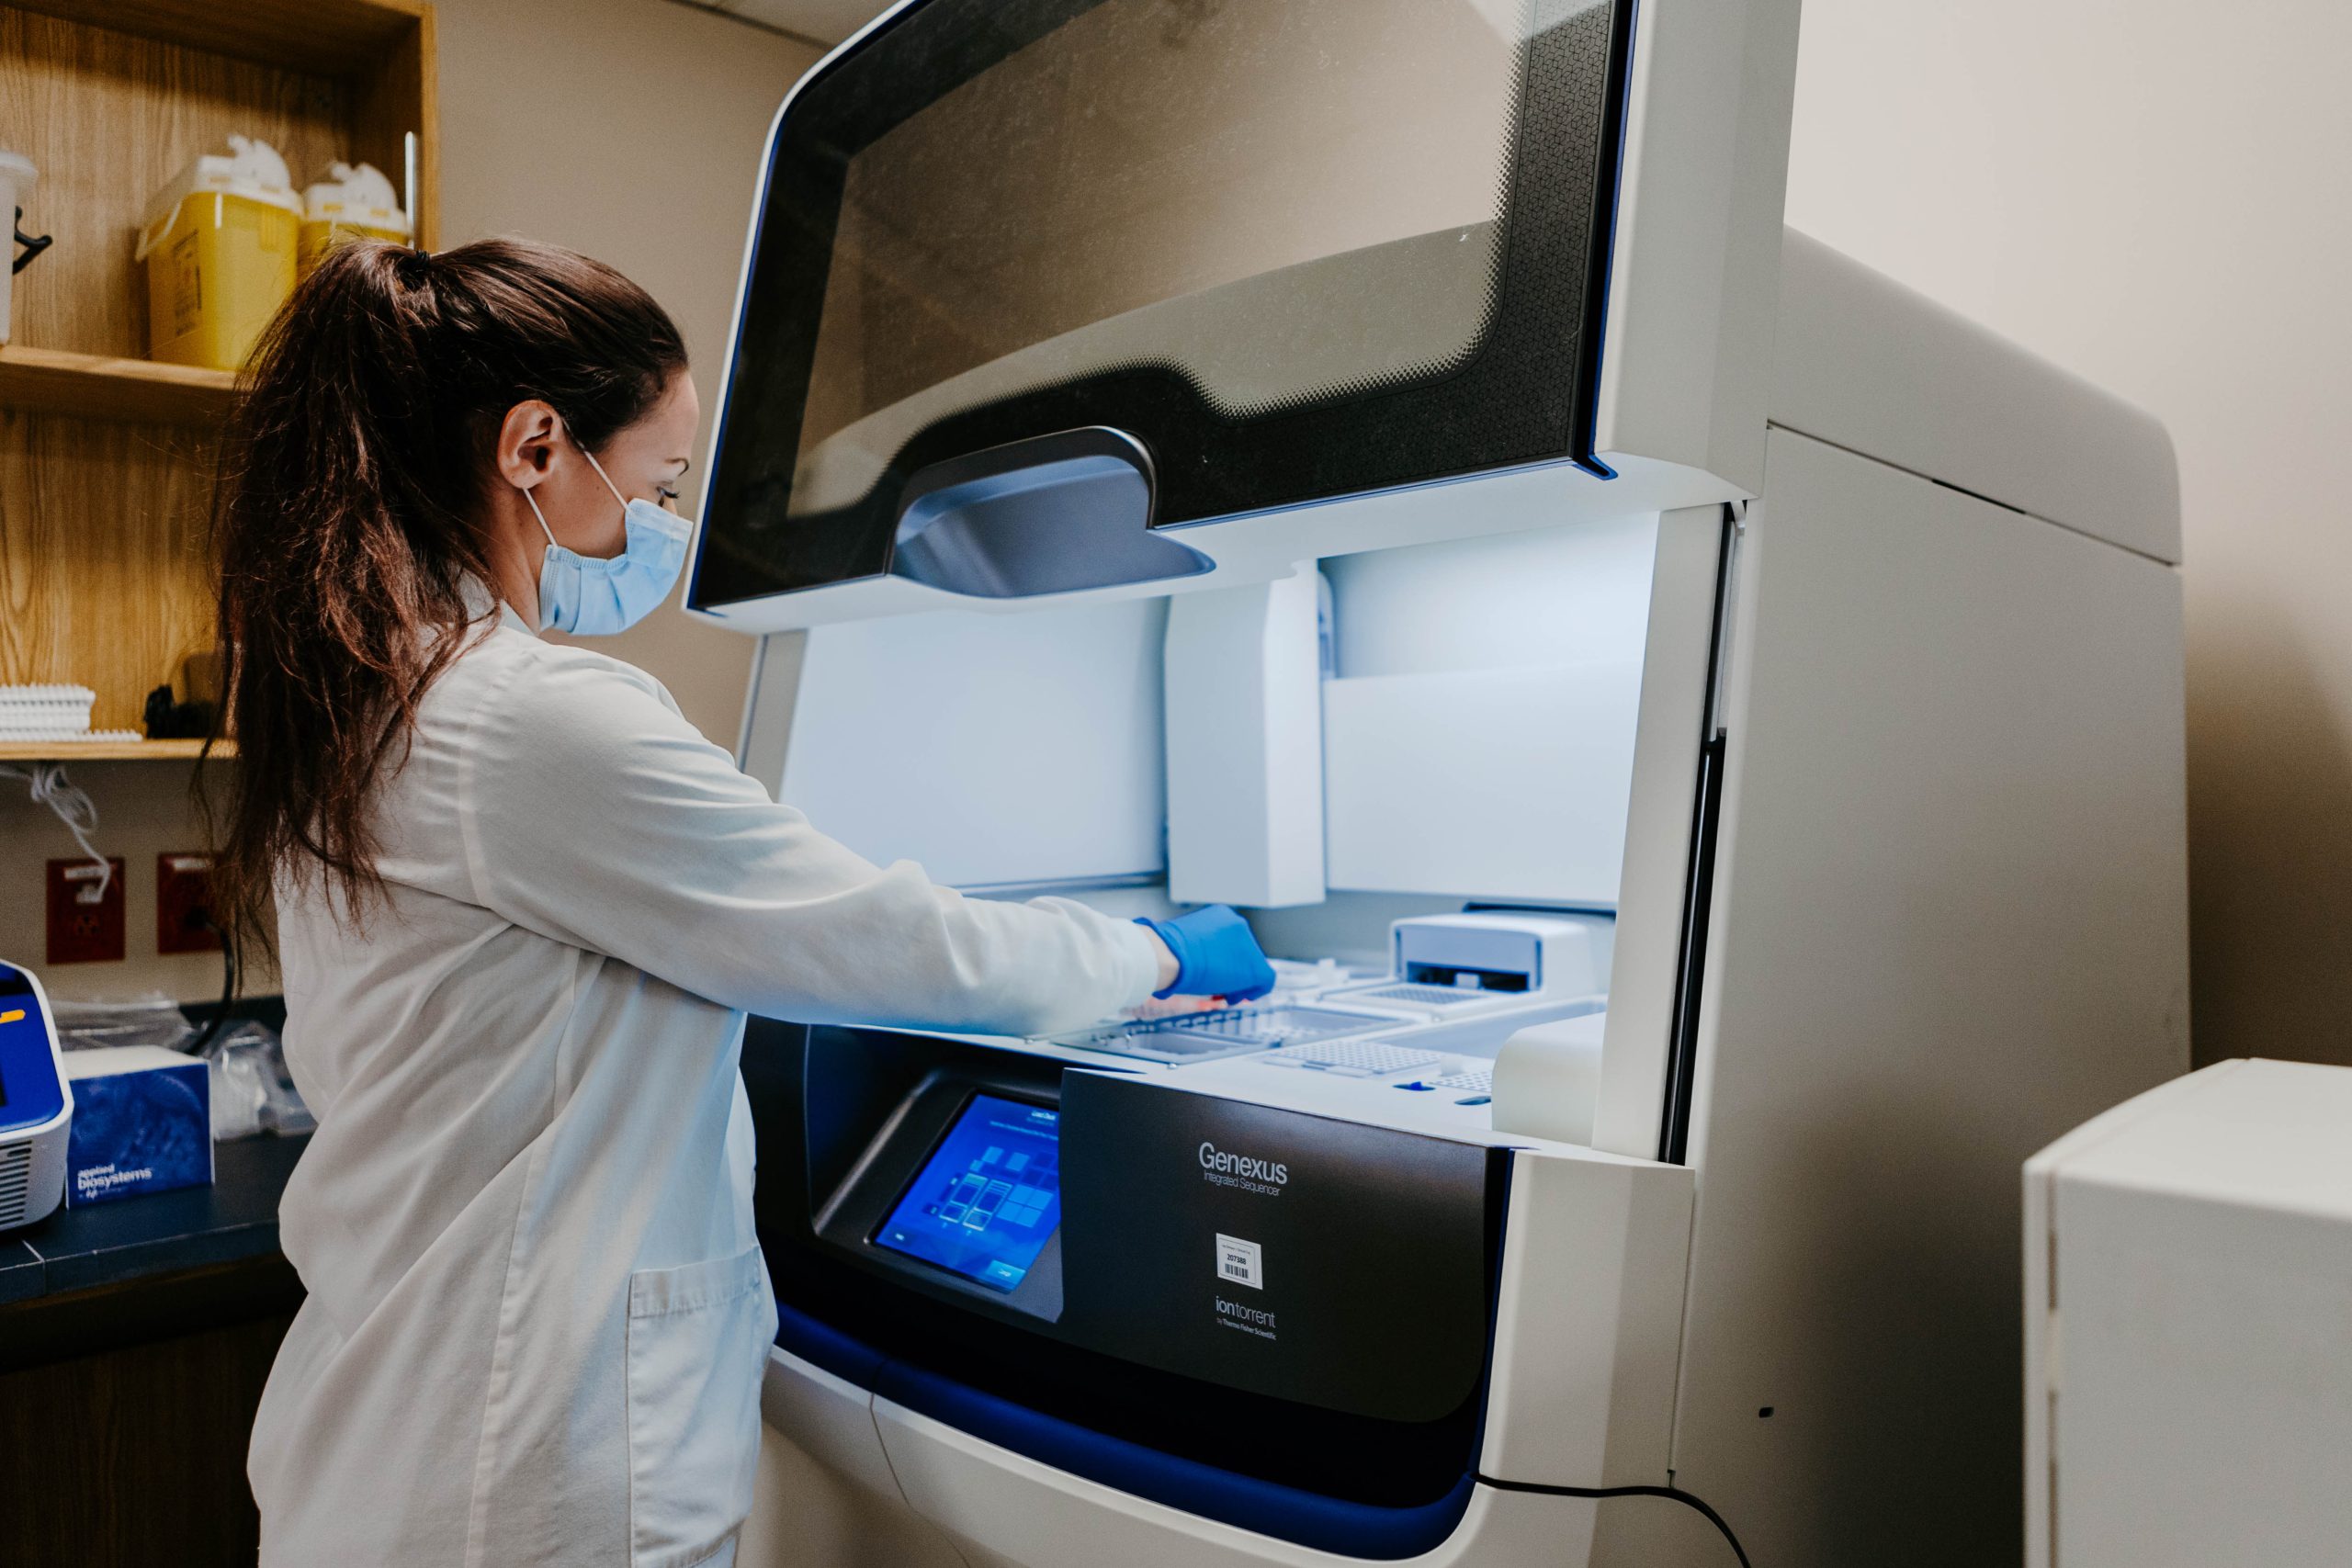 Renata Yehia, acting supervisor in Molecular Diagnostics and Cytogenetics loading panels into the Genexus machine to prepare for a run of tests.